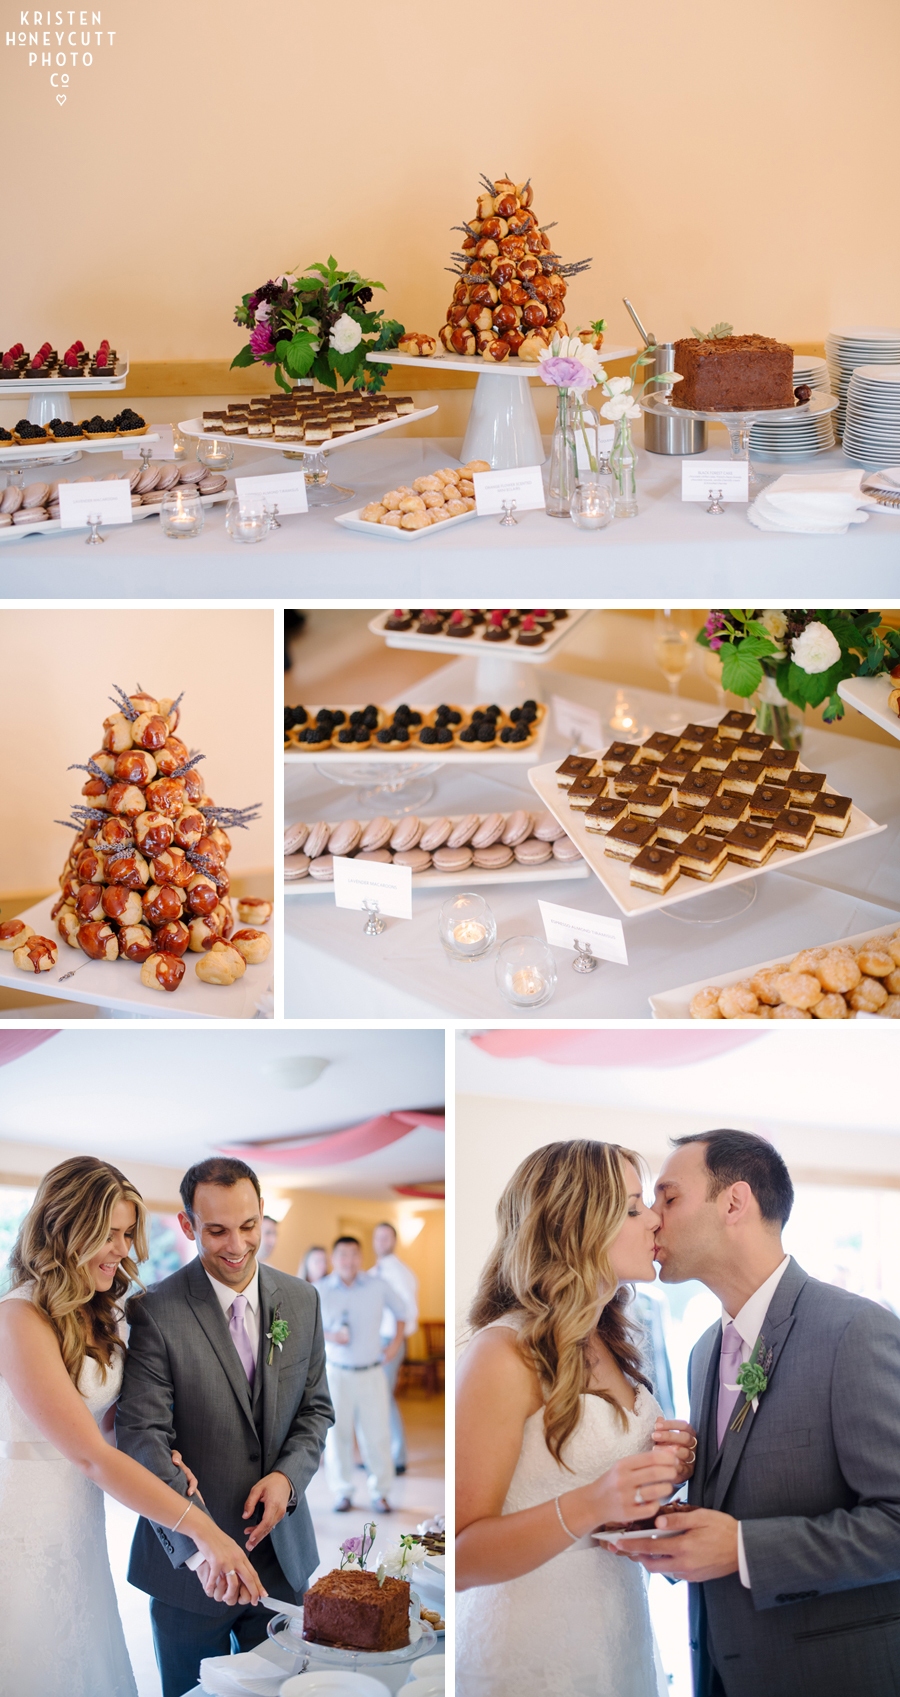 French desserts and pastries at Farm Kitchen wedding reception 